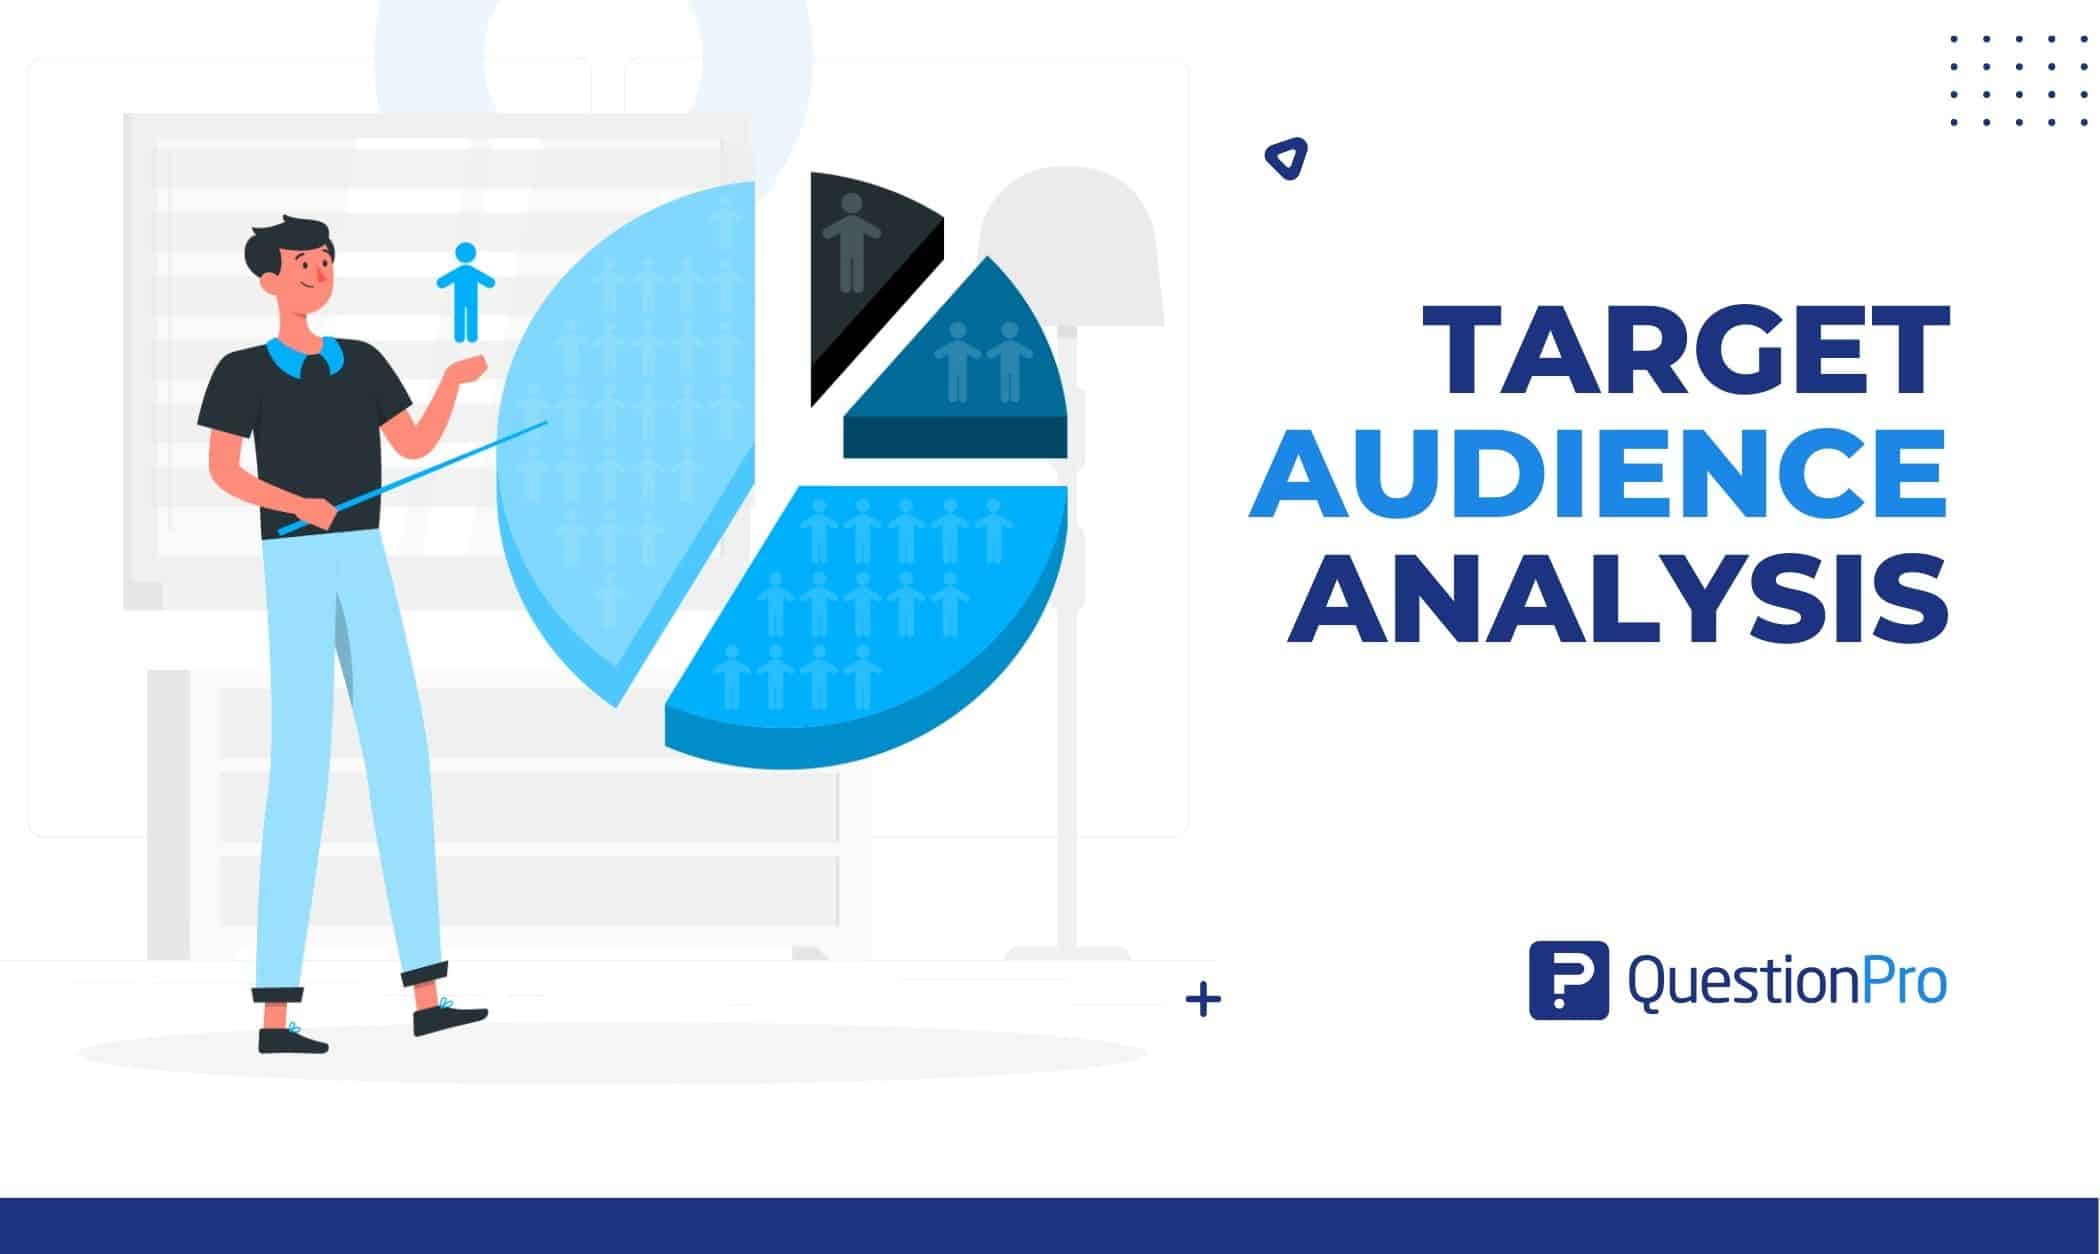 Target audience analysis examines the audiences' demographics, values, interests, & buying habits. Knowing it can help you make better plans.